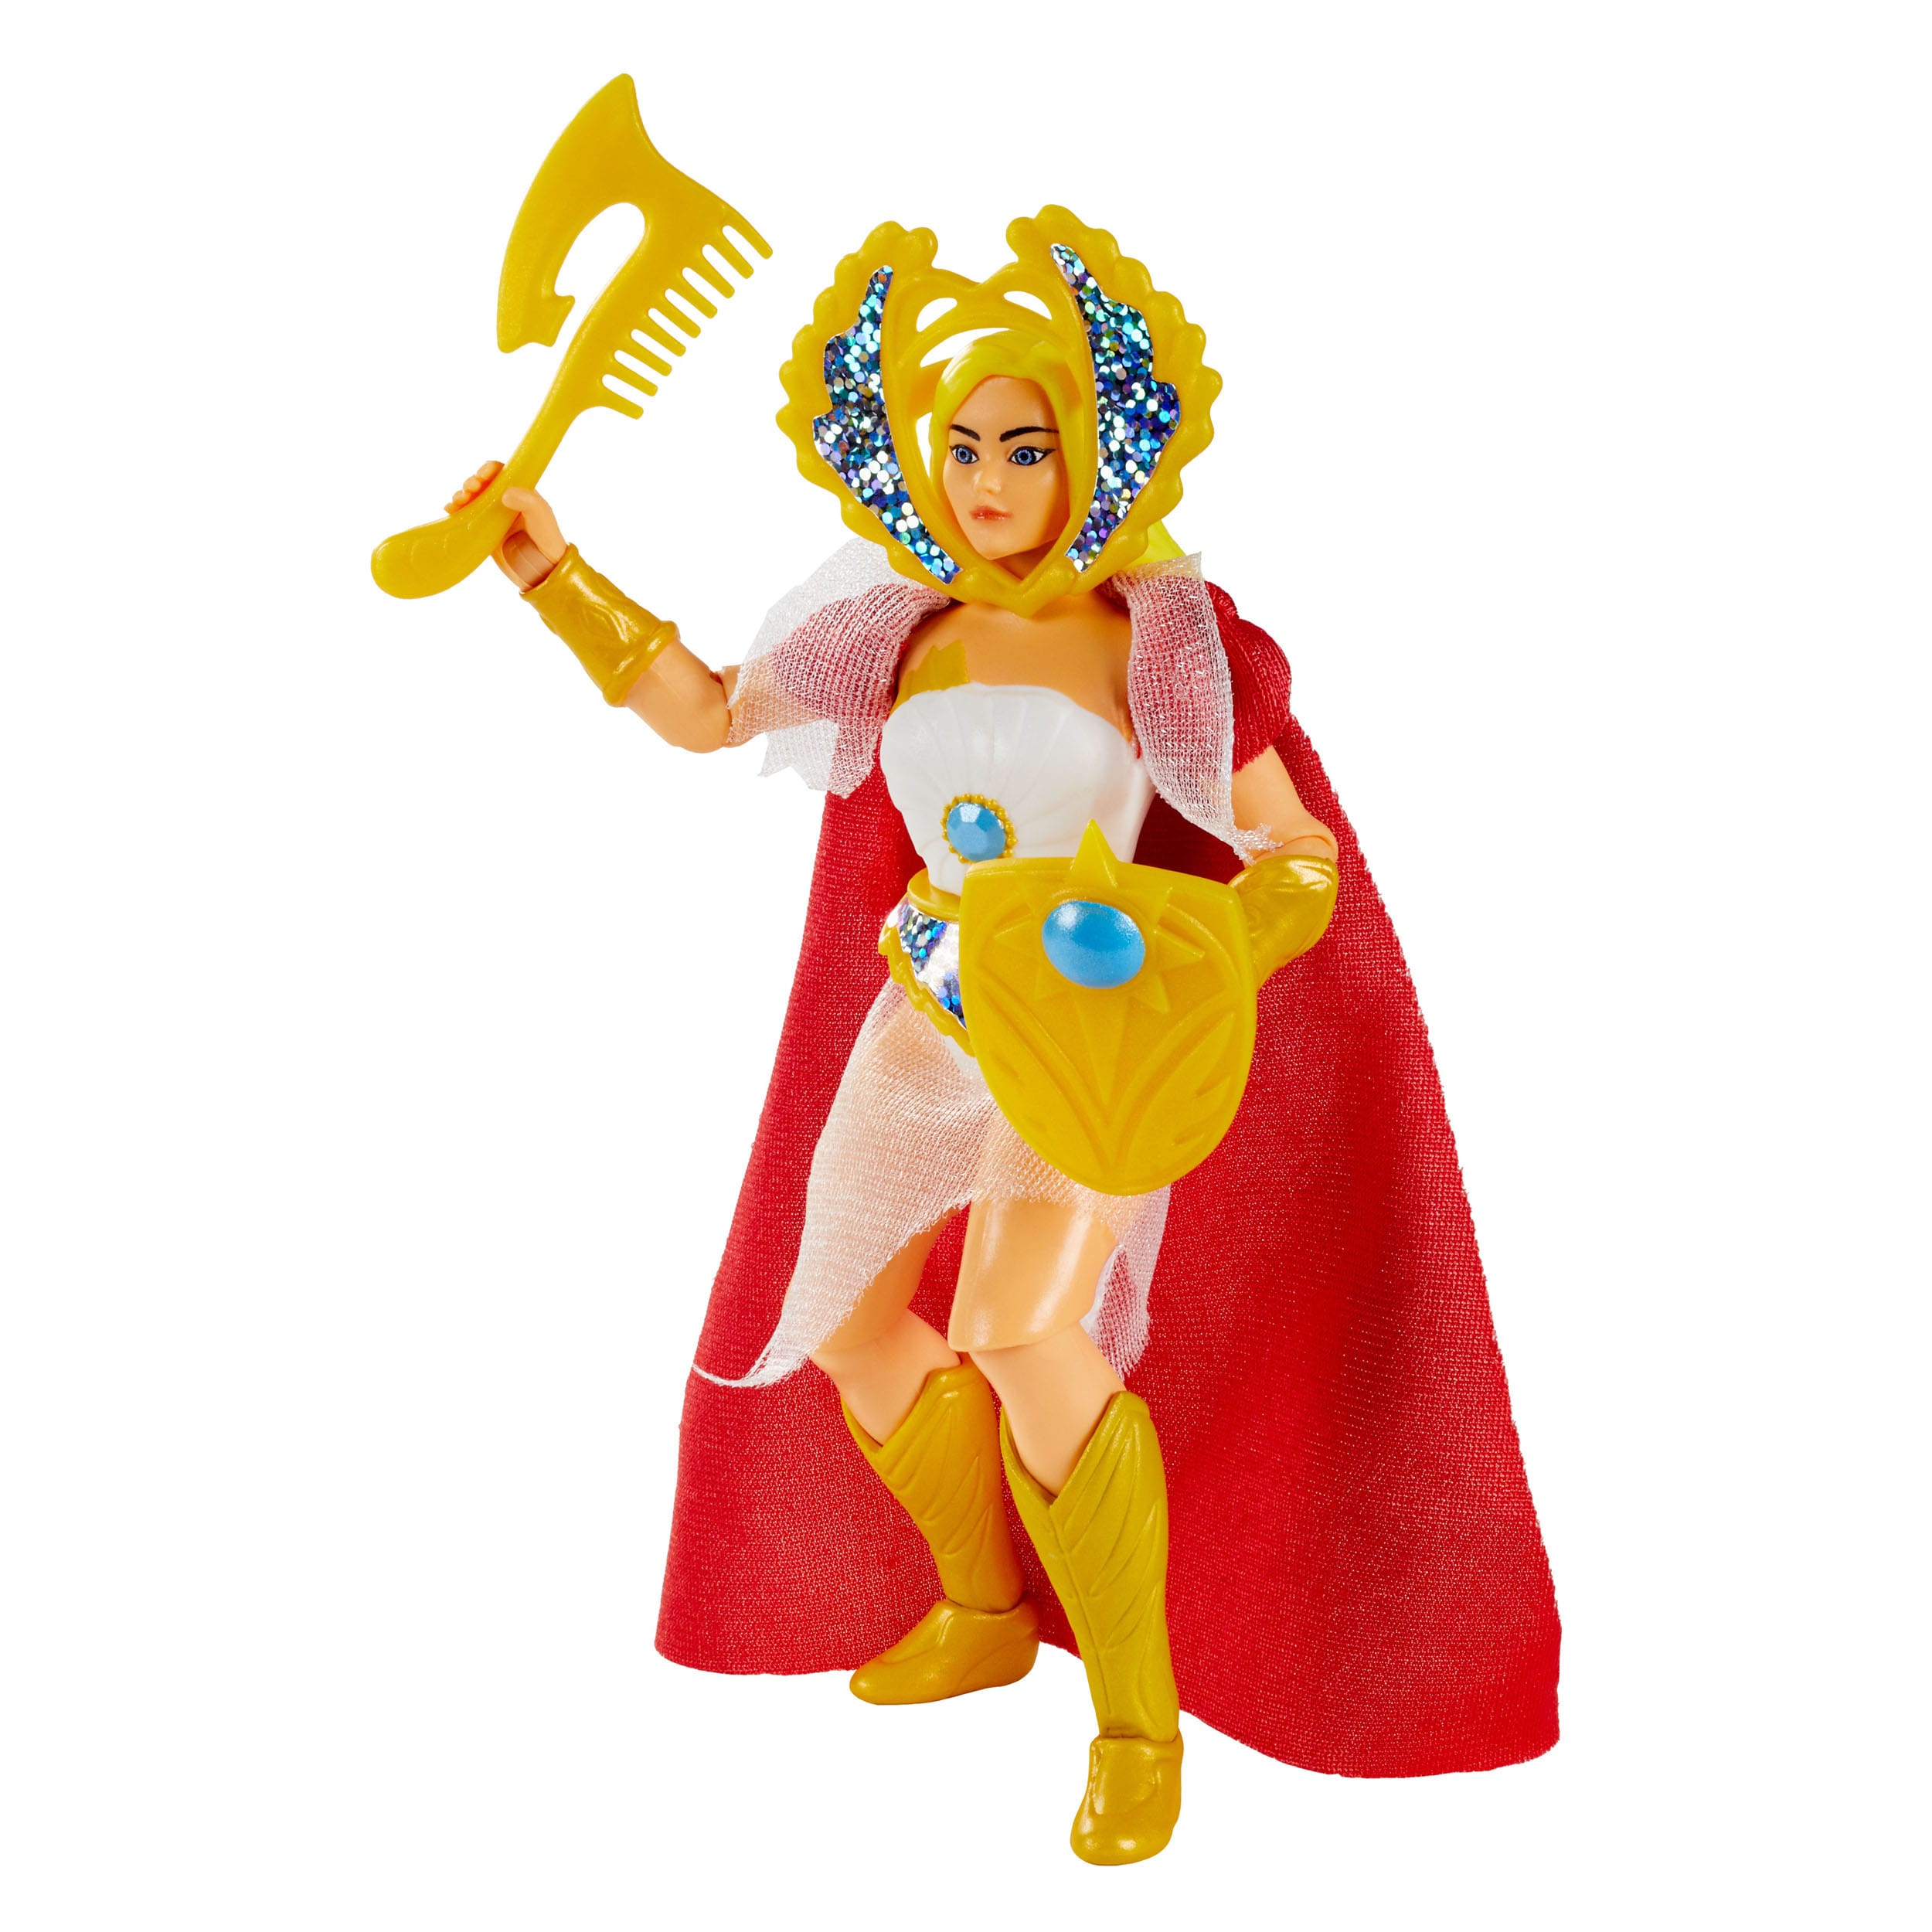 US Import!!!Masters of the Universe Origins Actionfigur Princess of Power: She-Ra 14 cm US Karte MATTHYD26 0194735244362